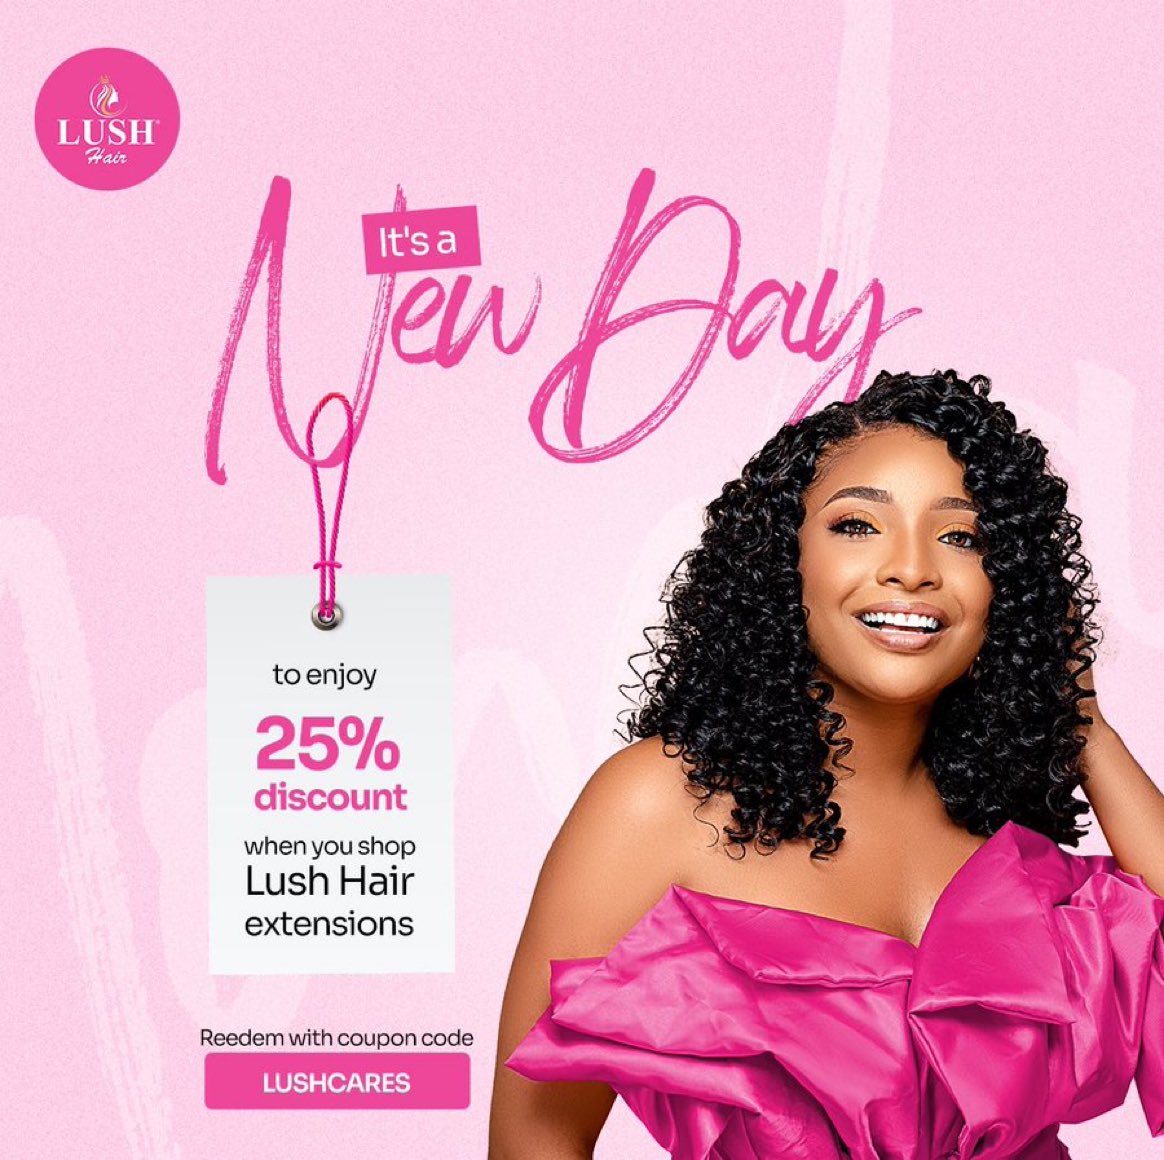 Did you know ? With the discount code “LushCares” you can now enjoy 25% discount when you purchase any Lush Hair Extensions. 😁

Tag 2 people in the comments to let them know about this great offer 😉

#LushHair
#BeBeautiful